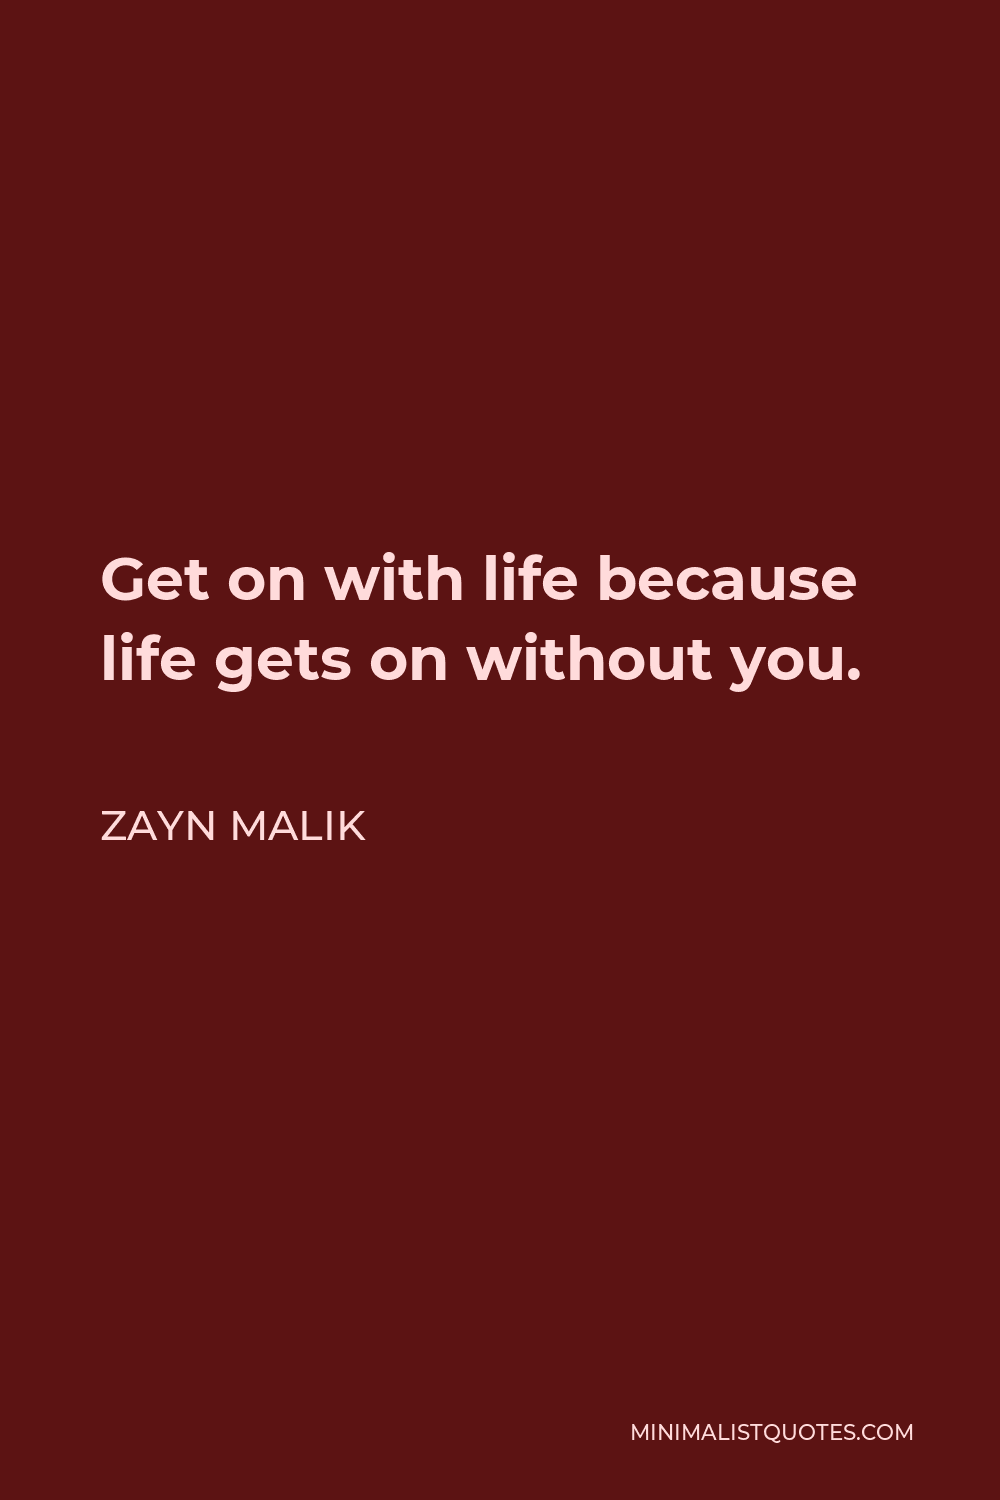 Zayn Malik Quote - Get on with life because life gets on without you.